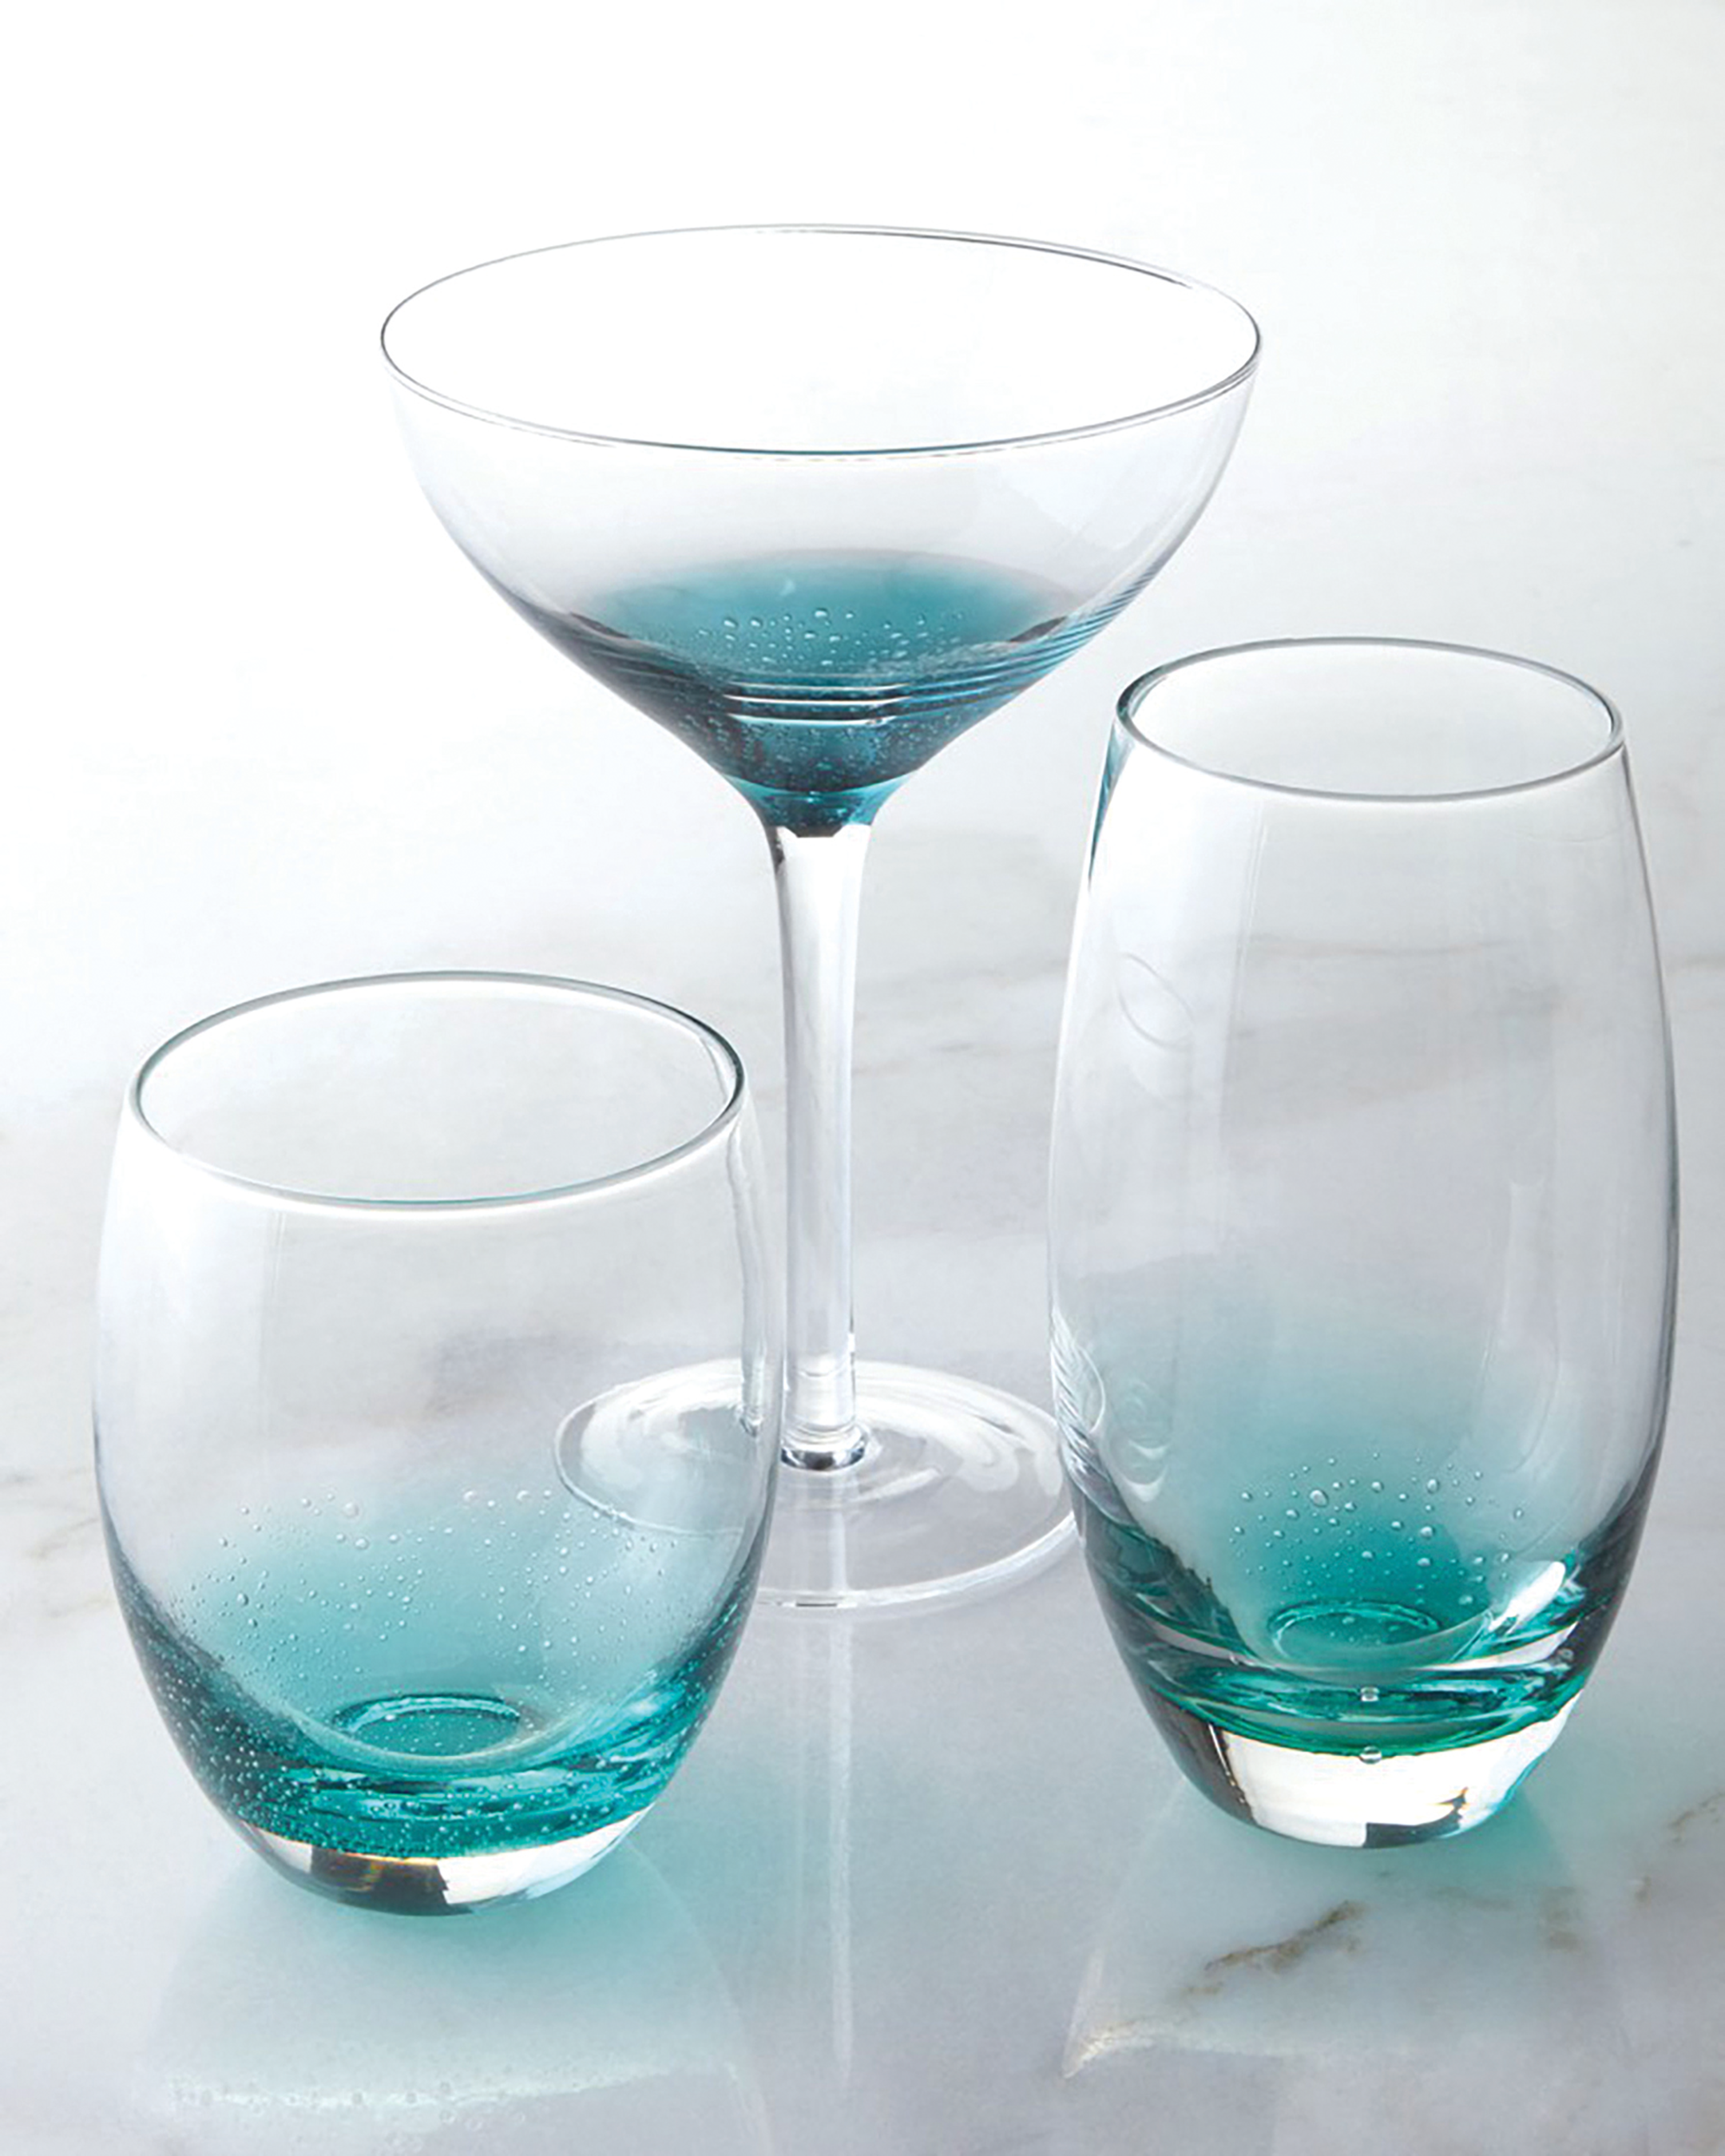  The  Nassau Rocks Aqua  boasts beautiful, hand-blown weighted glassware with modern pops of colour and texture; perfect for everyday use.  www.althompson.com  